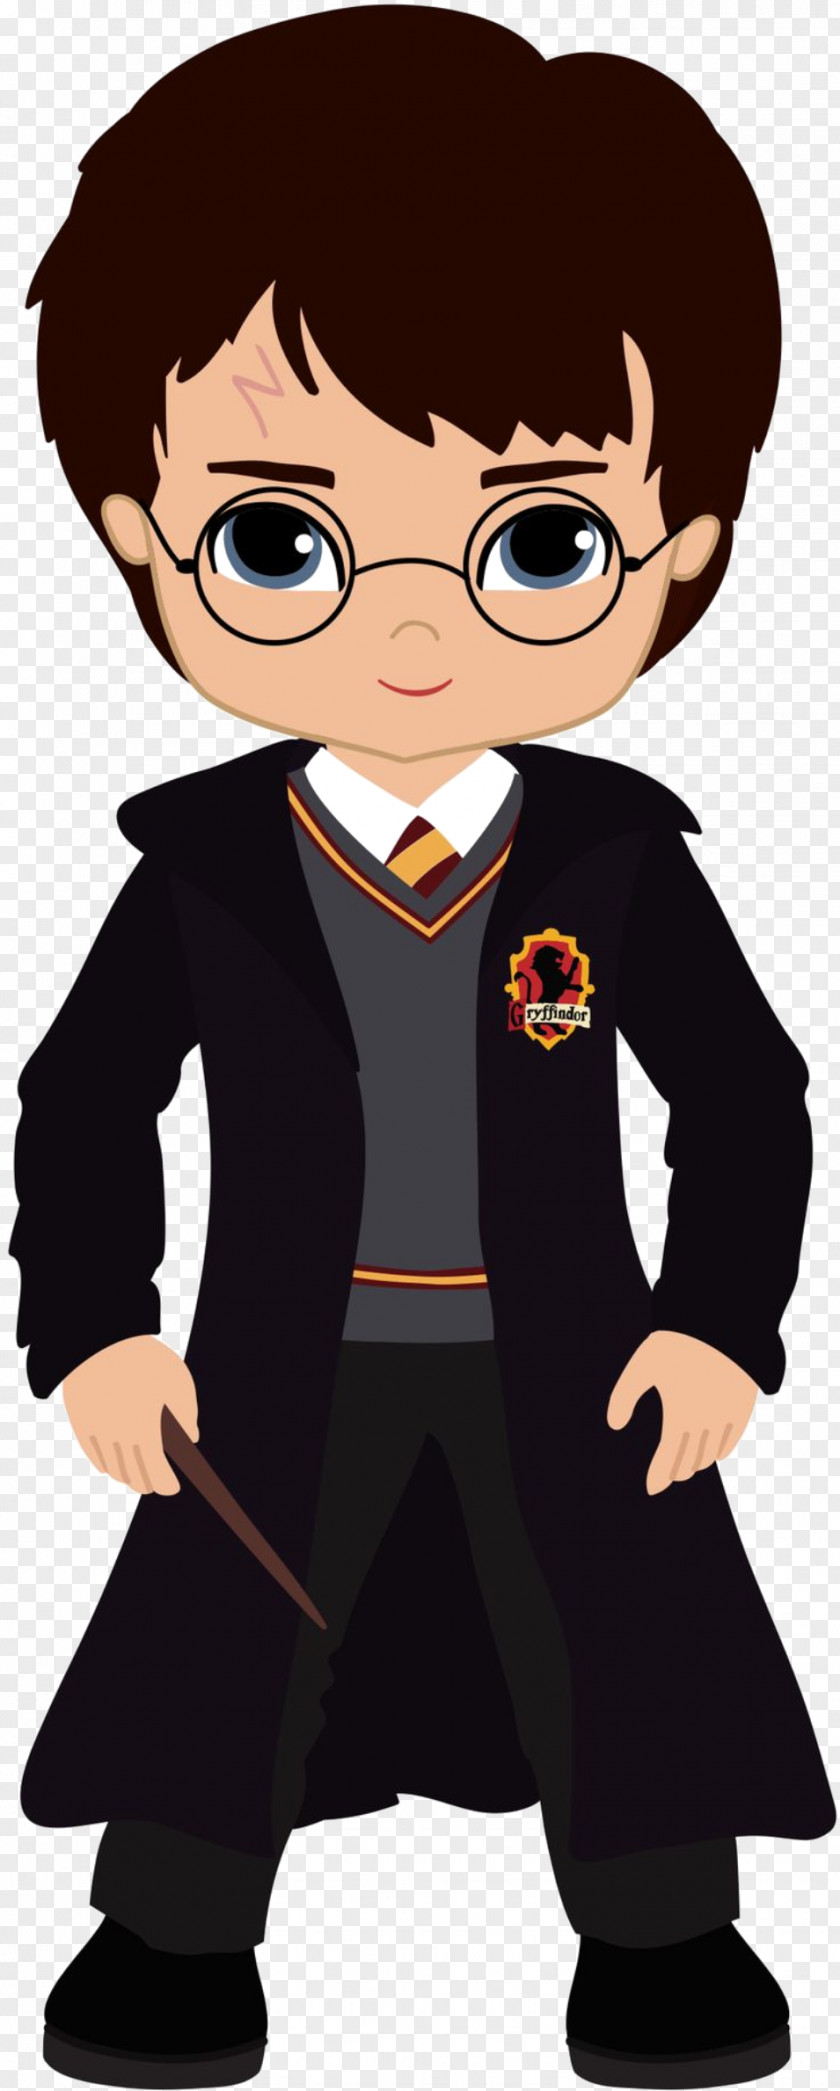 Harry Potter (Literary Series) Clip Art Openclipart Hogwarts School Of Witchcraft And Wizardry PNG